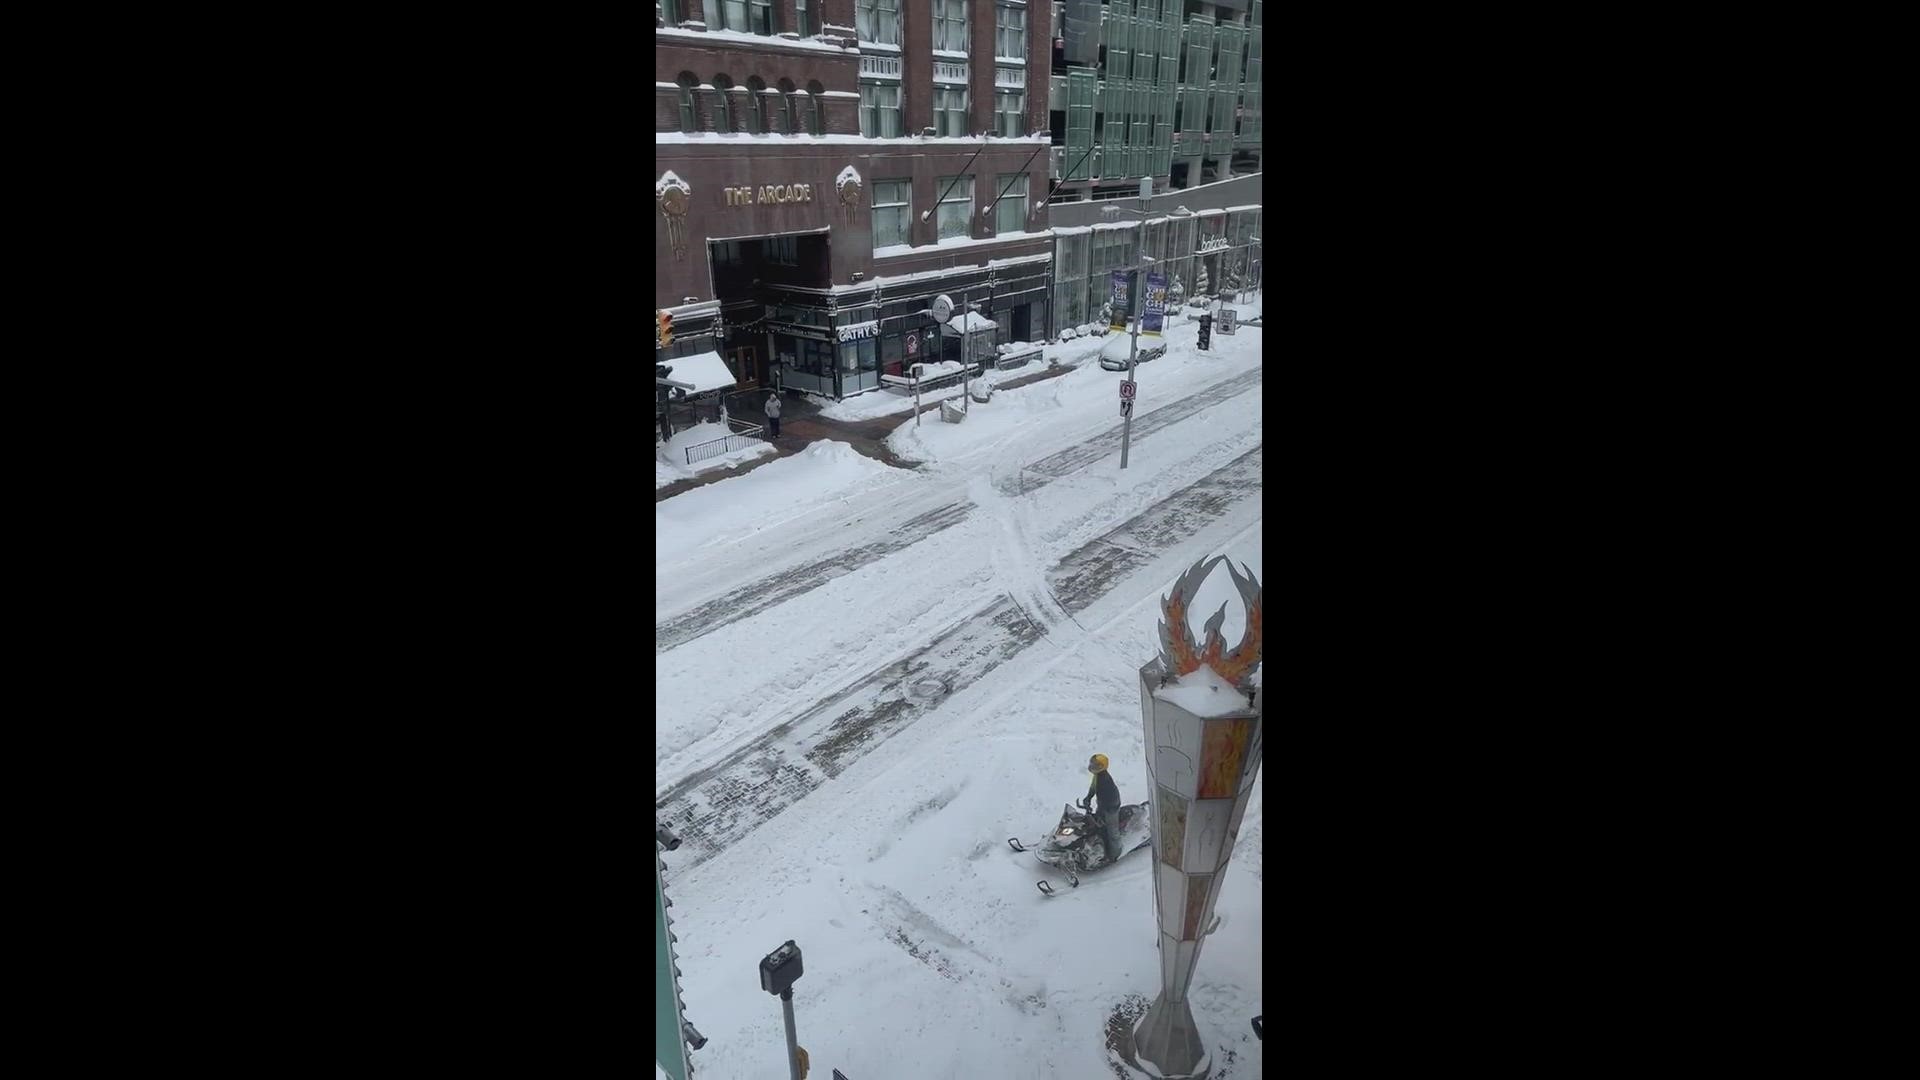 Here's something you don't see everday on the streets of downtown Cleveland. We received this video of a person riding their snowmobile down Euclid Avenue.